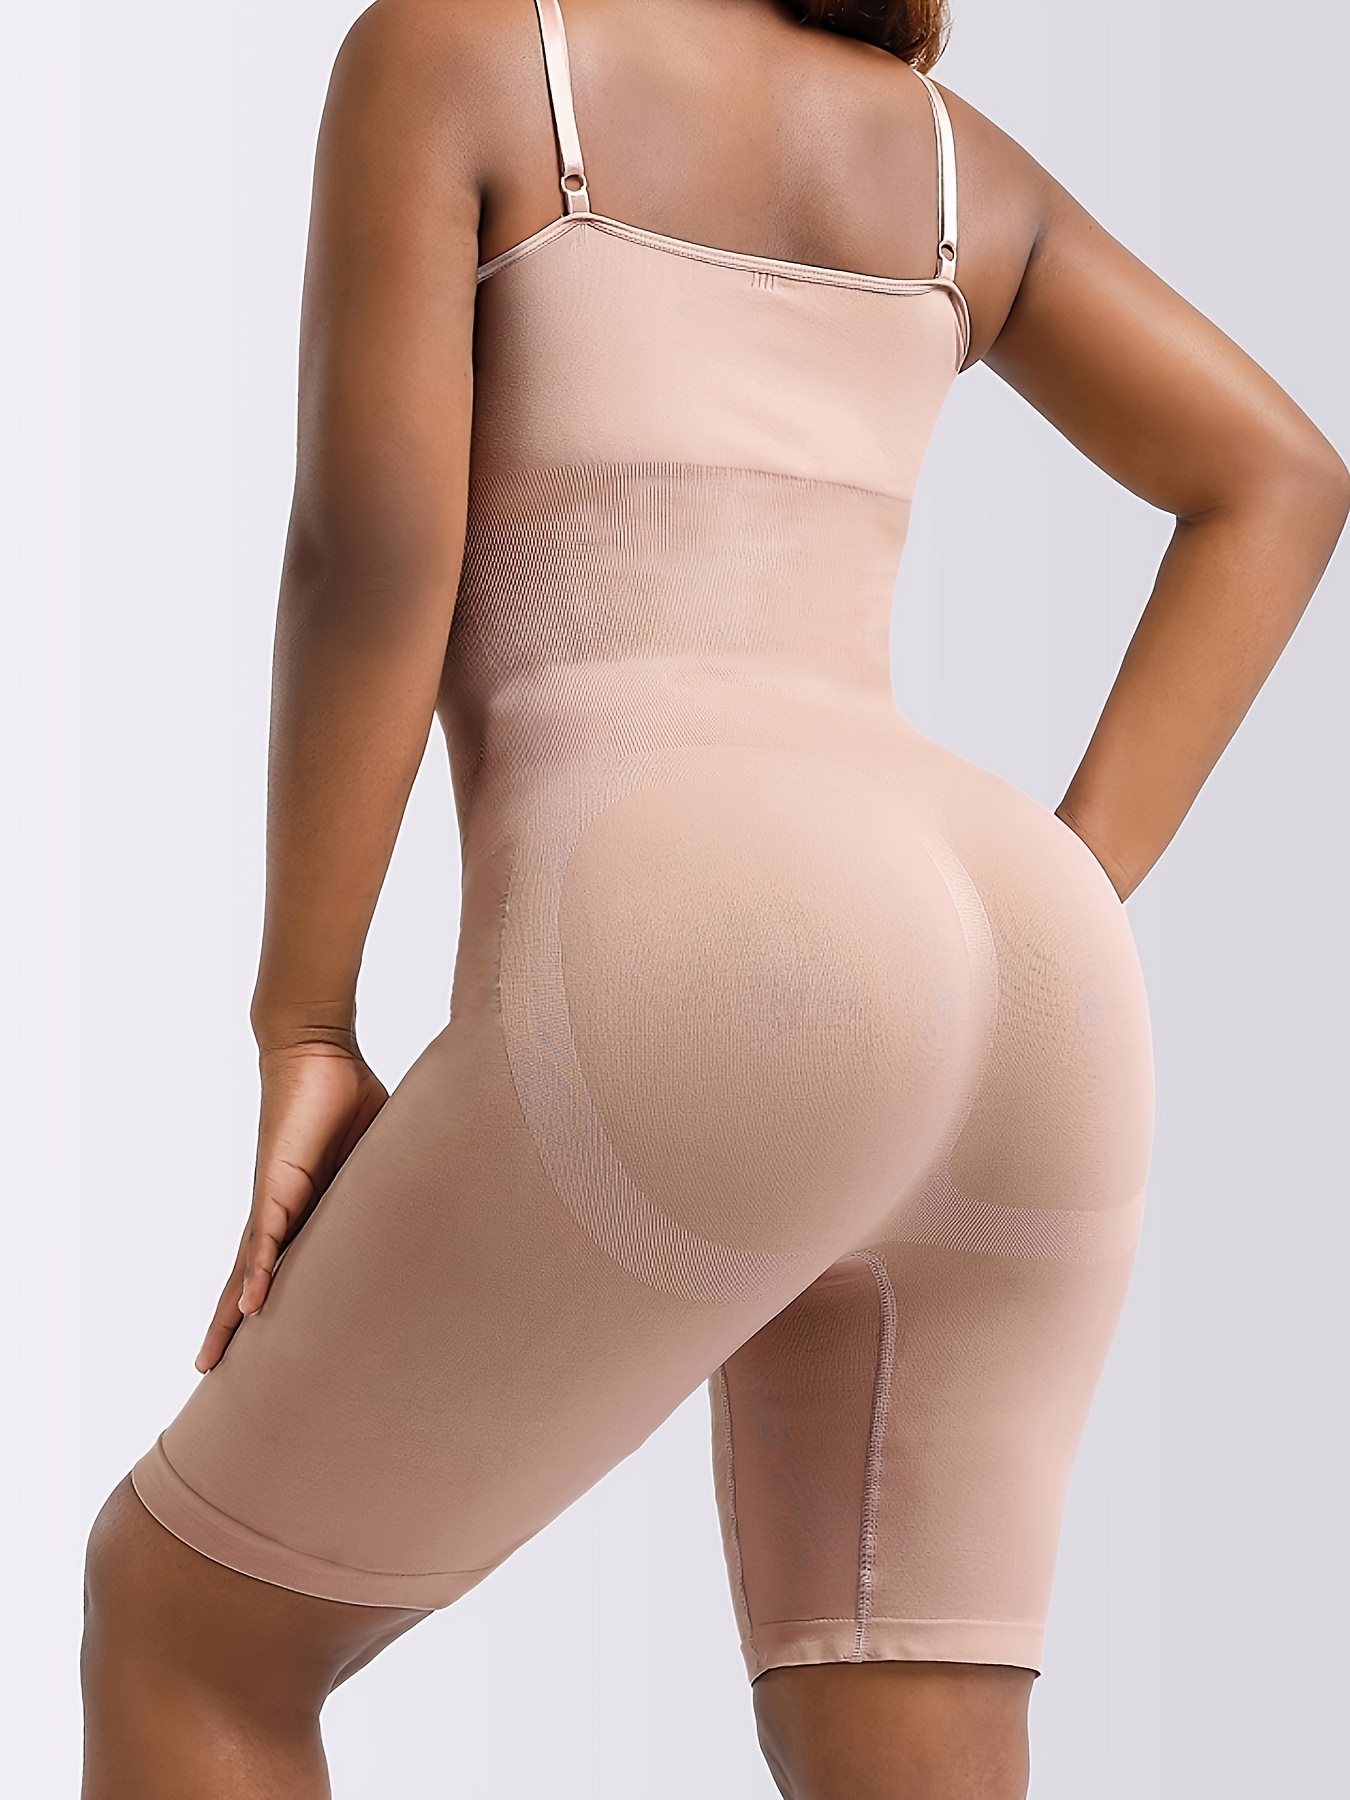 Womens Slimming Bodysuit Jumsuit With Bodysuit Waist Trainer Shapewear,  Padded Bra, And V Neck Top For Postpartum Recovery And Shapewear From  Hm2017, $18.26